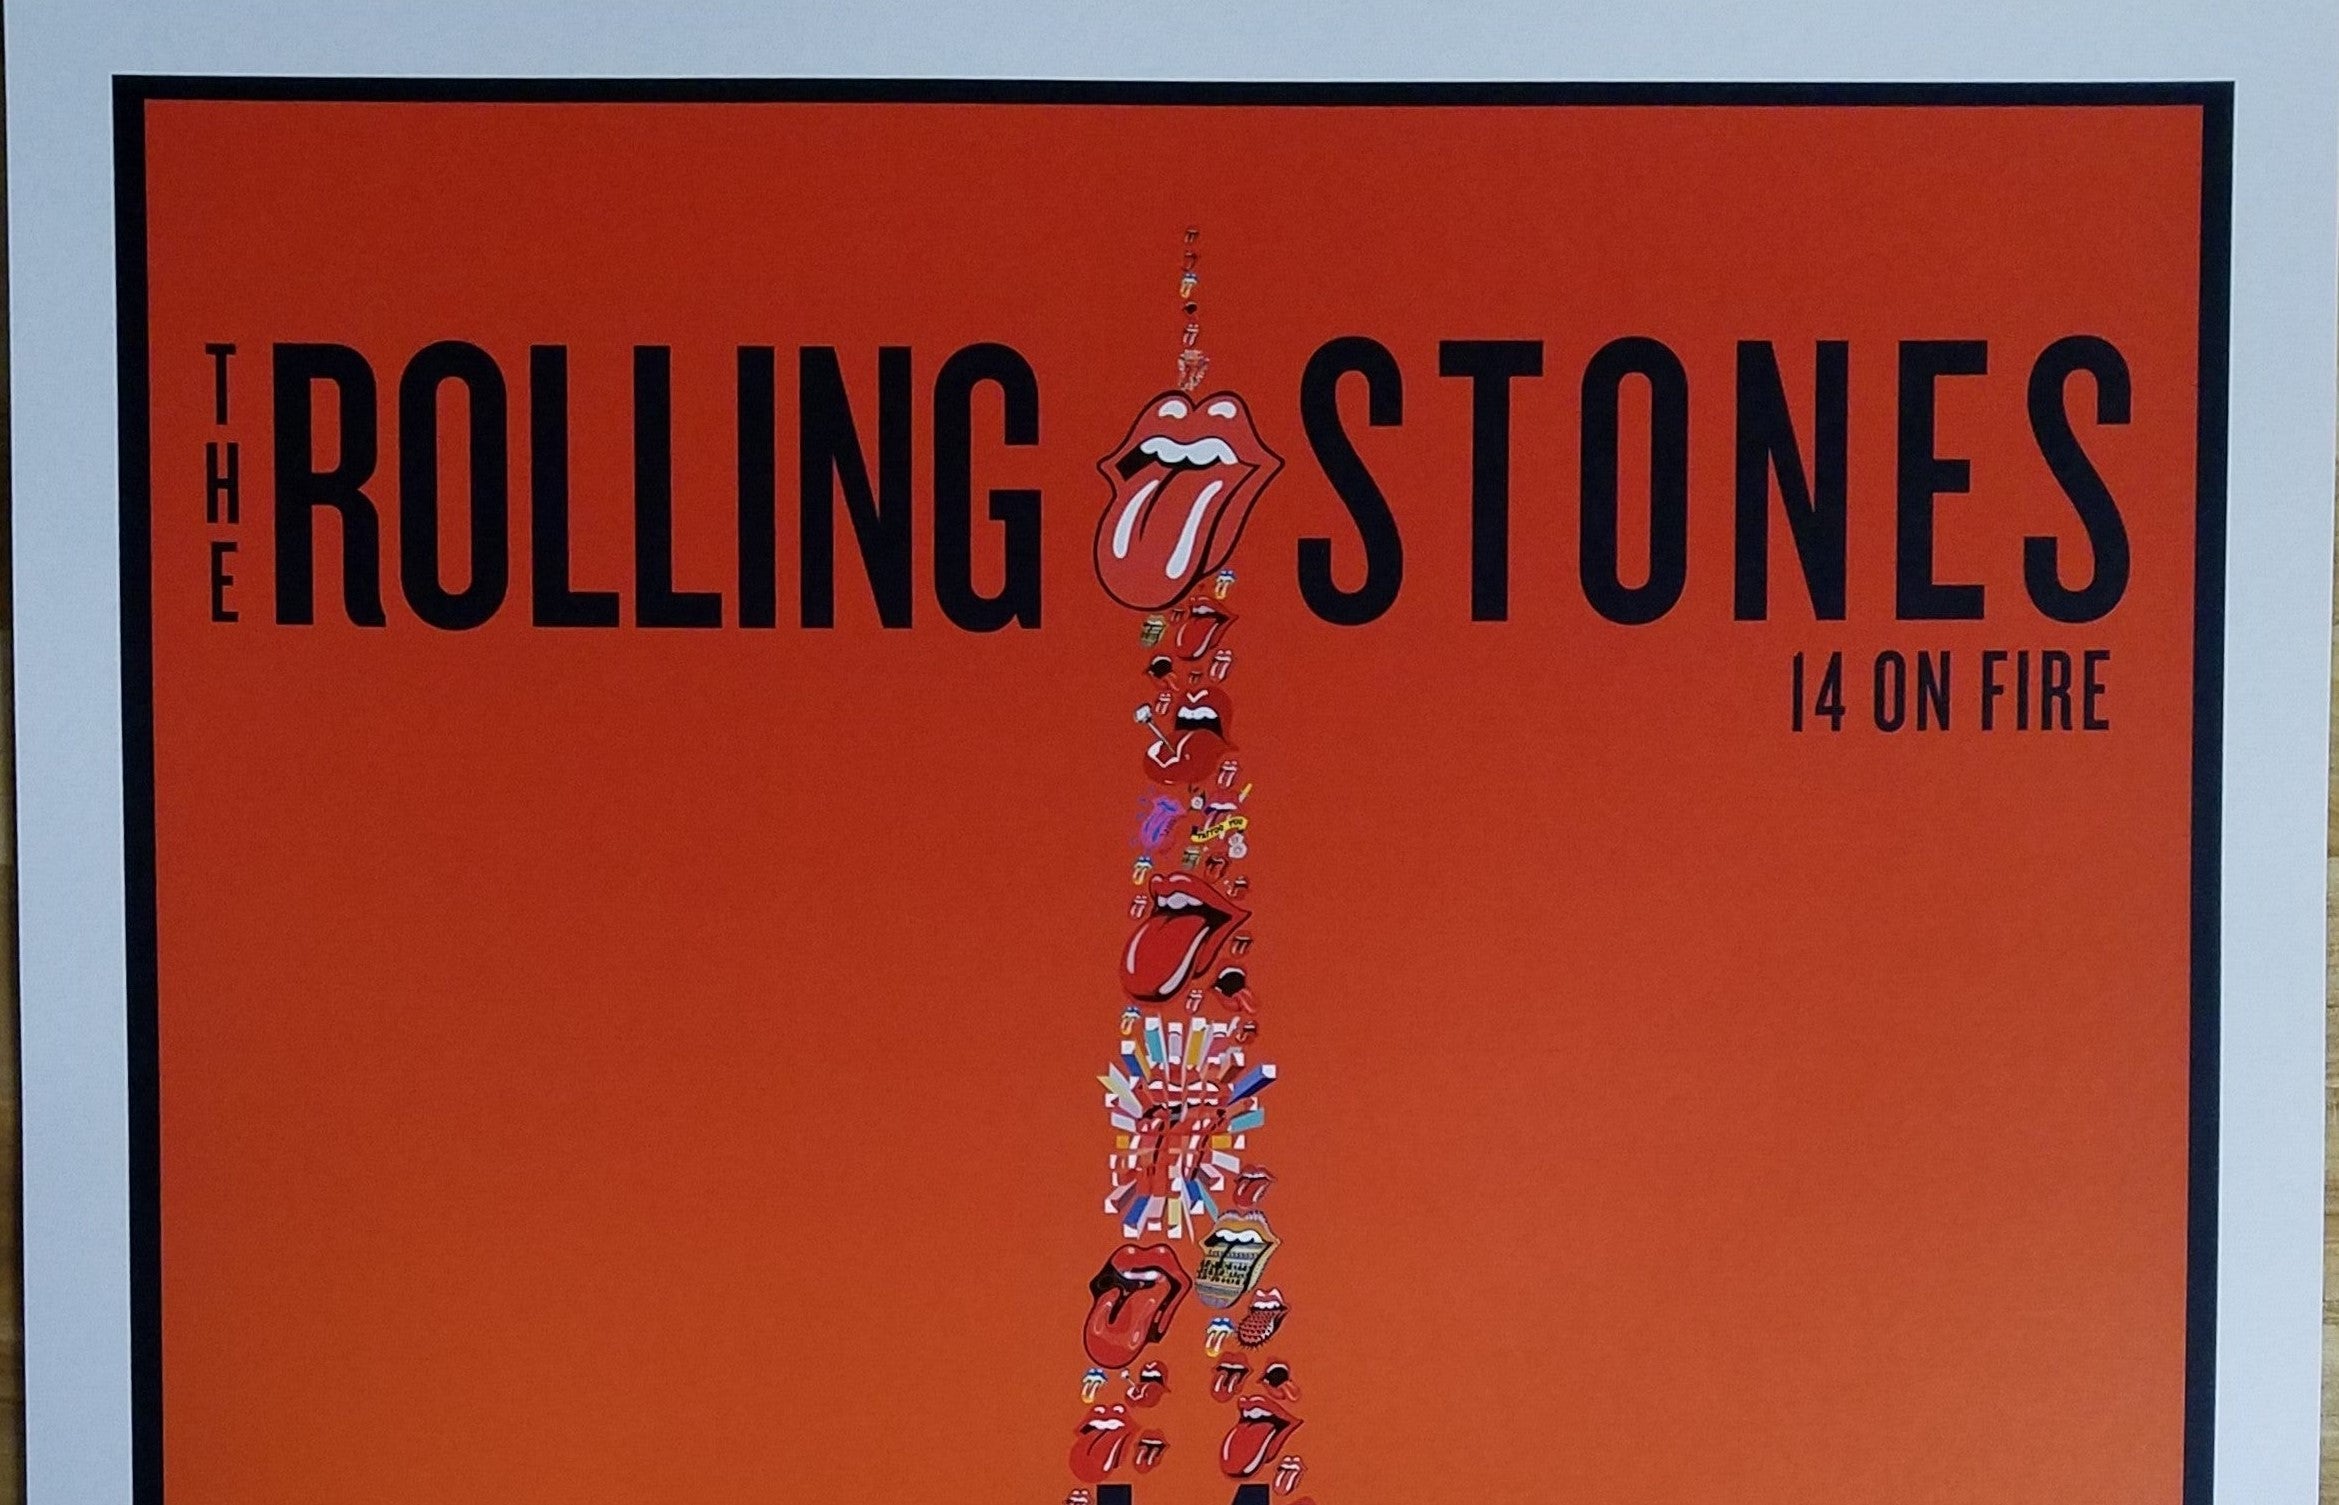 Title:  Rolling Stones - 2014 OFFICIAL POSTER PARIS FRANCE  Poster artist:   Edition:  xx/500  Type:  Limited edition lithograph   Size:  17" x 23"  Location: Paris, France   Venue: Stade De France   Notes:  1st edition, official poster hand numbered and embossed.  Official poster, Europe 14 On Fire Tour original from the show!